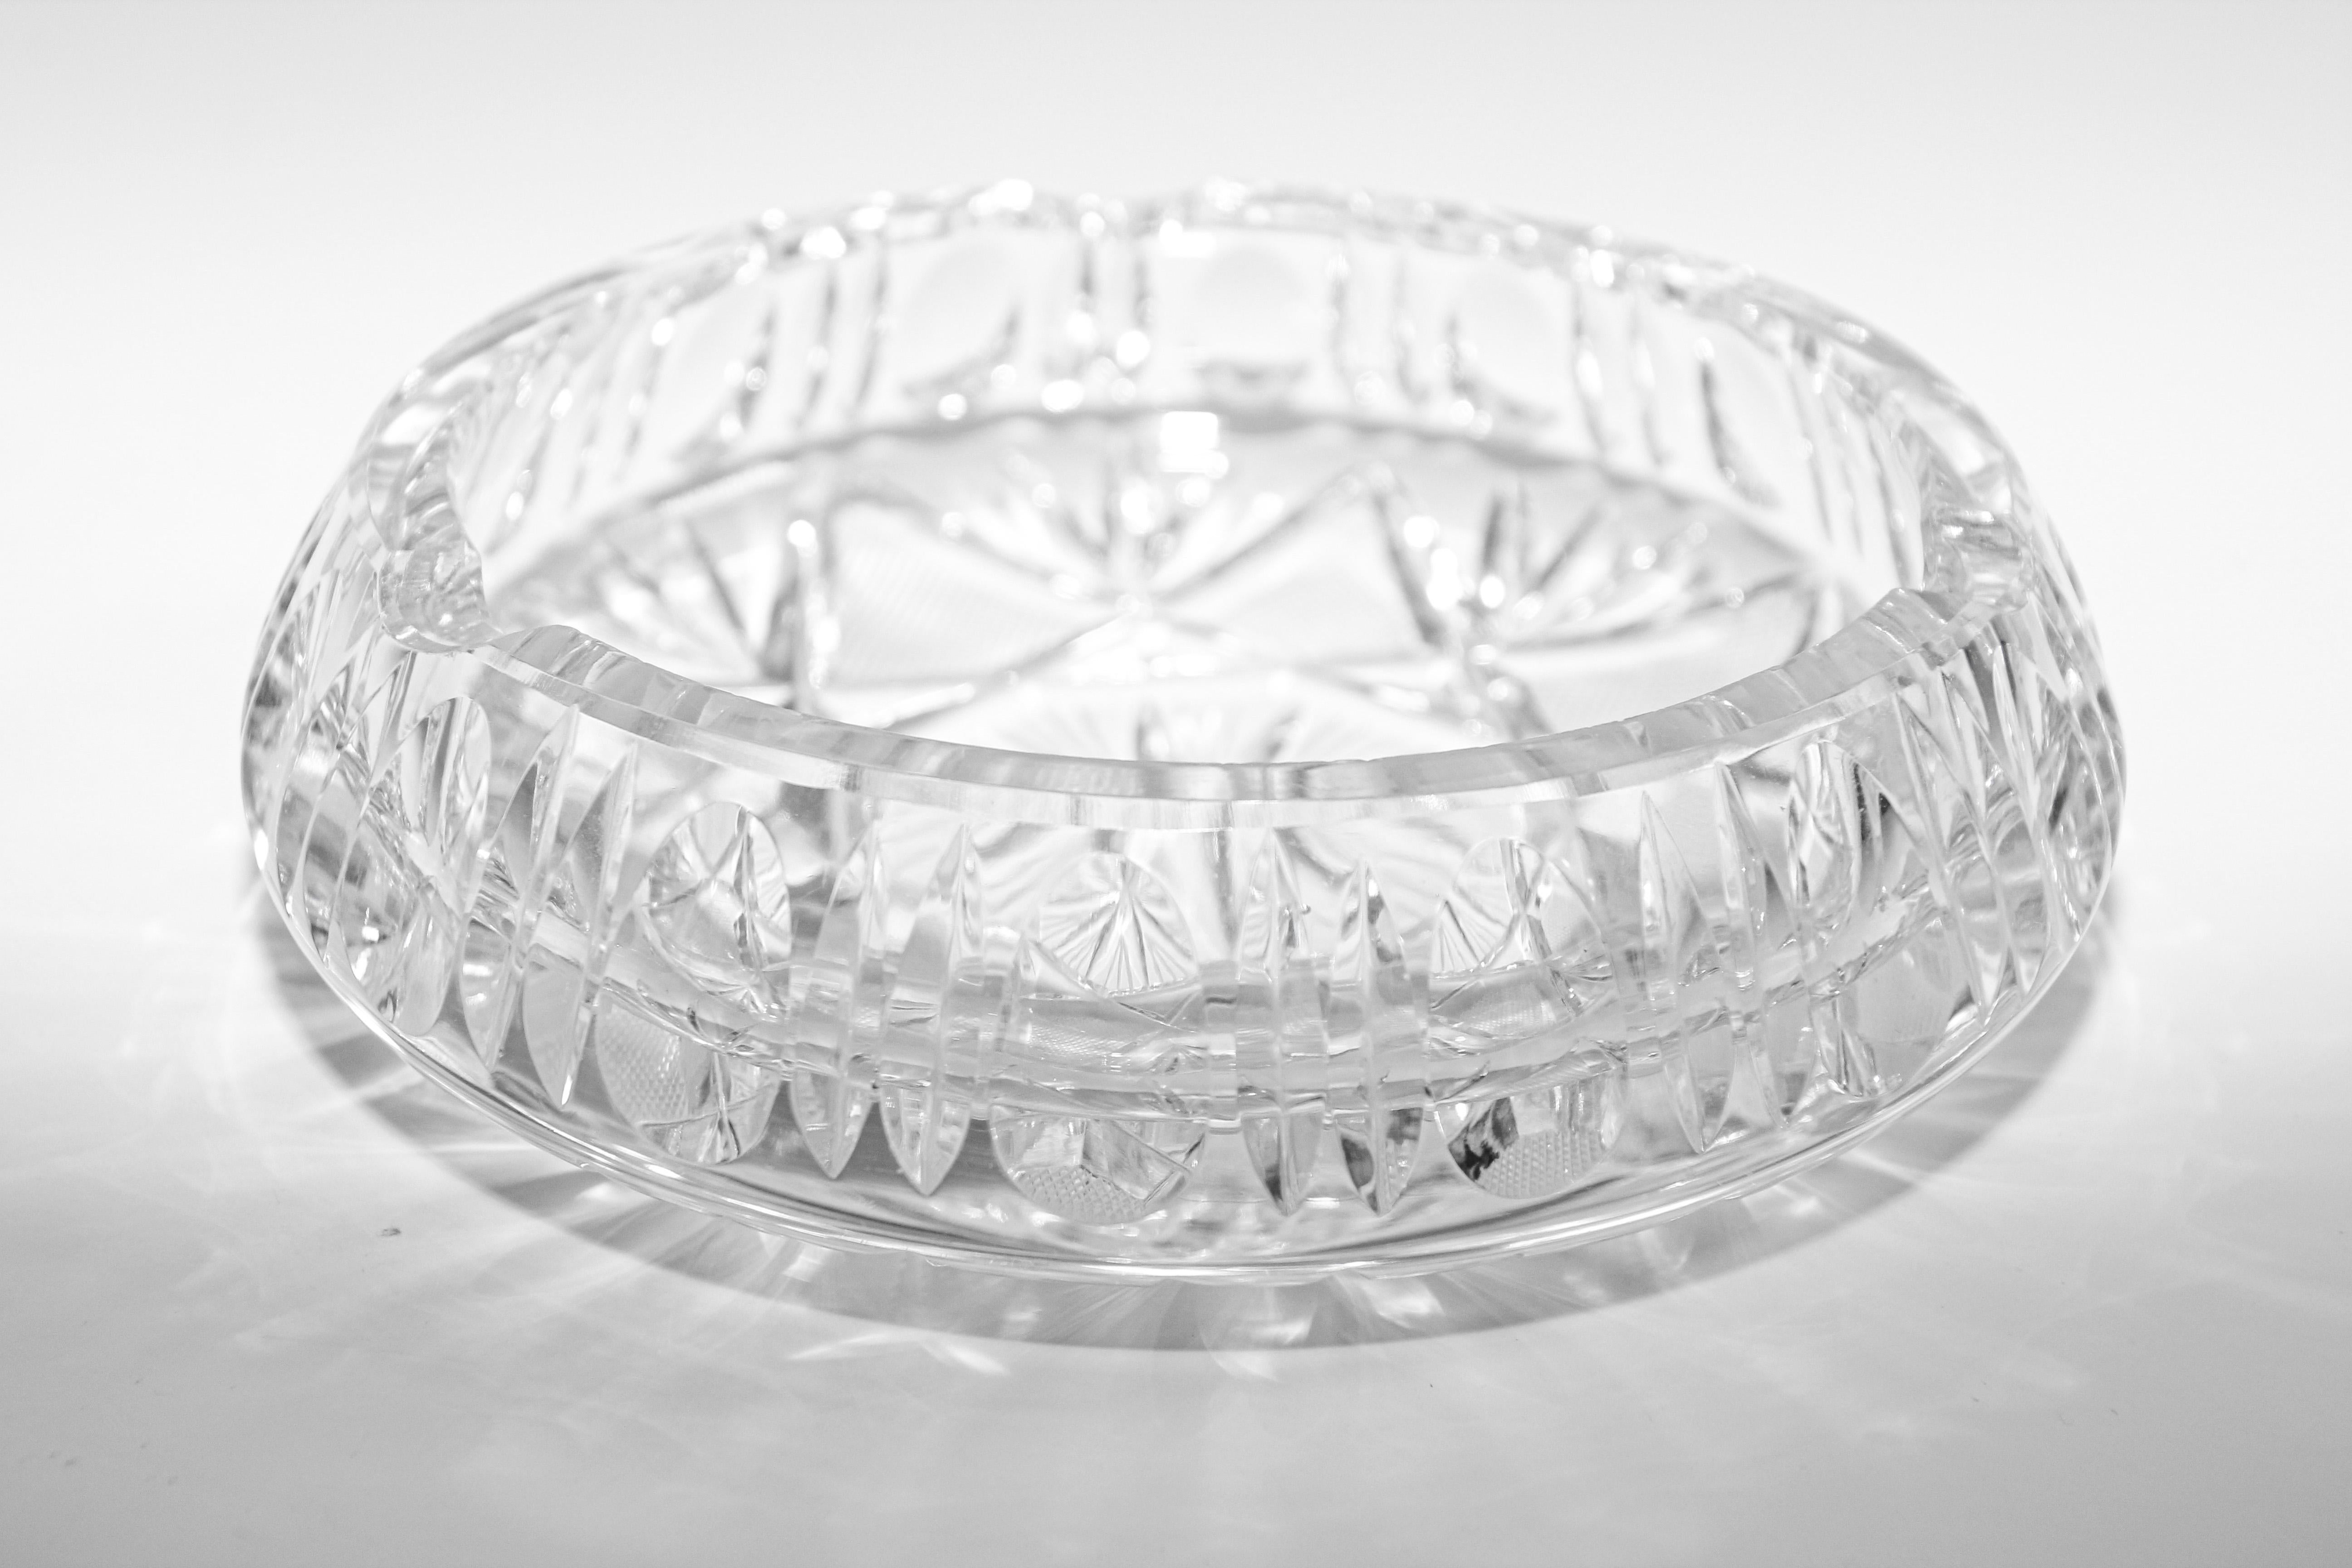 Beautiful cut crystal clear glass ashtray decorated with a cut star design.
Wonderful fashionable glass multifaceted ashtray or decorative object
Heavy clear handcut etched crystal glass cigar ashtray.
The bottom of the bowl is gorgeous and